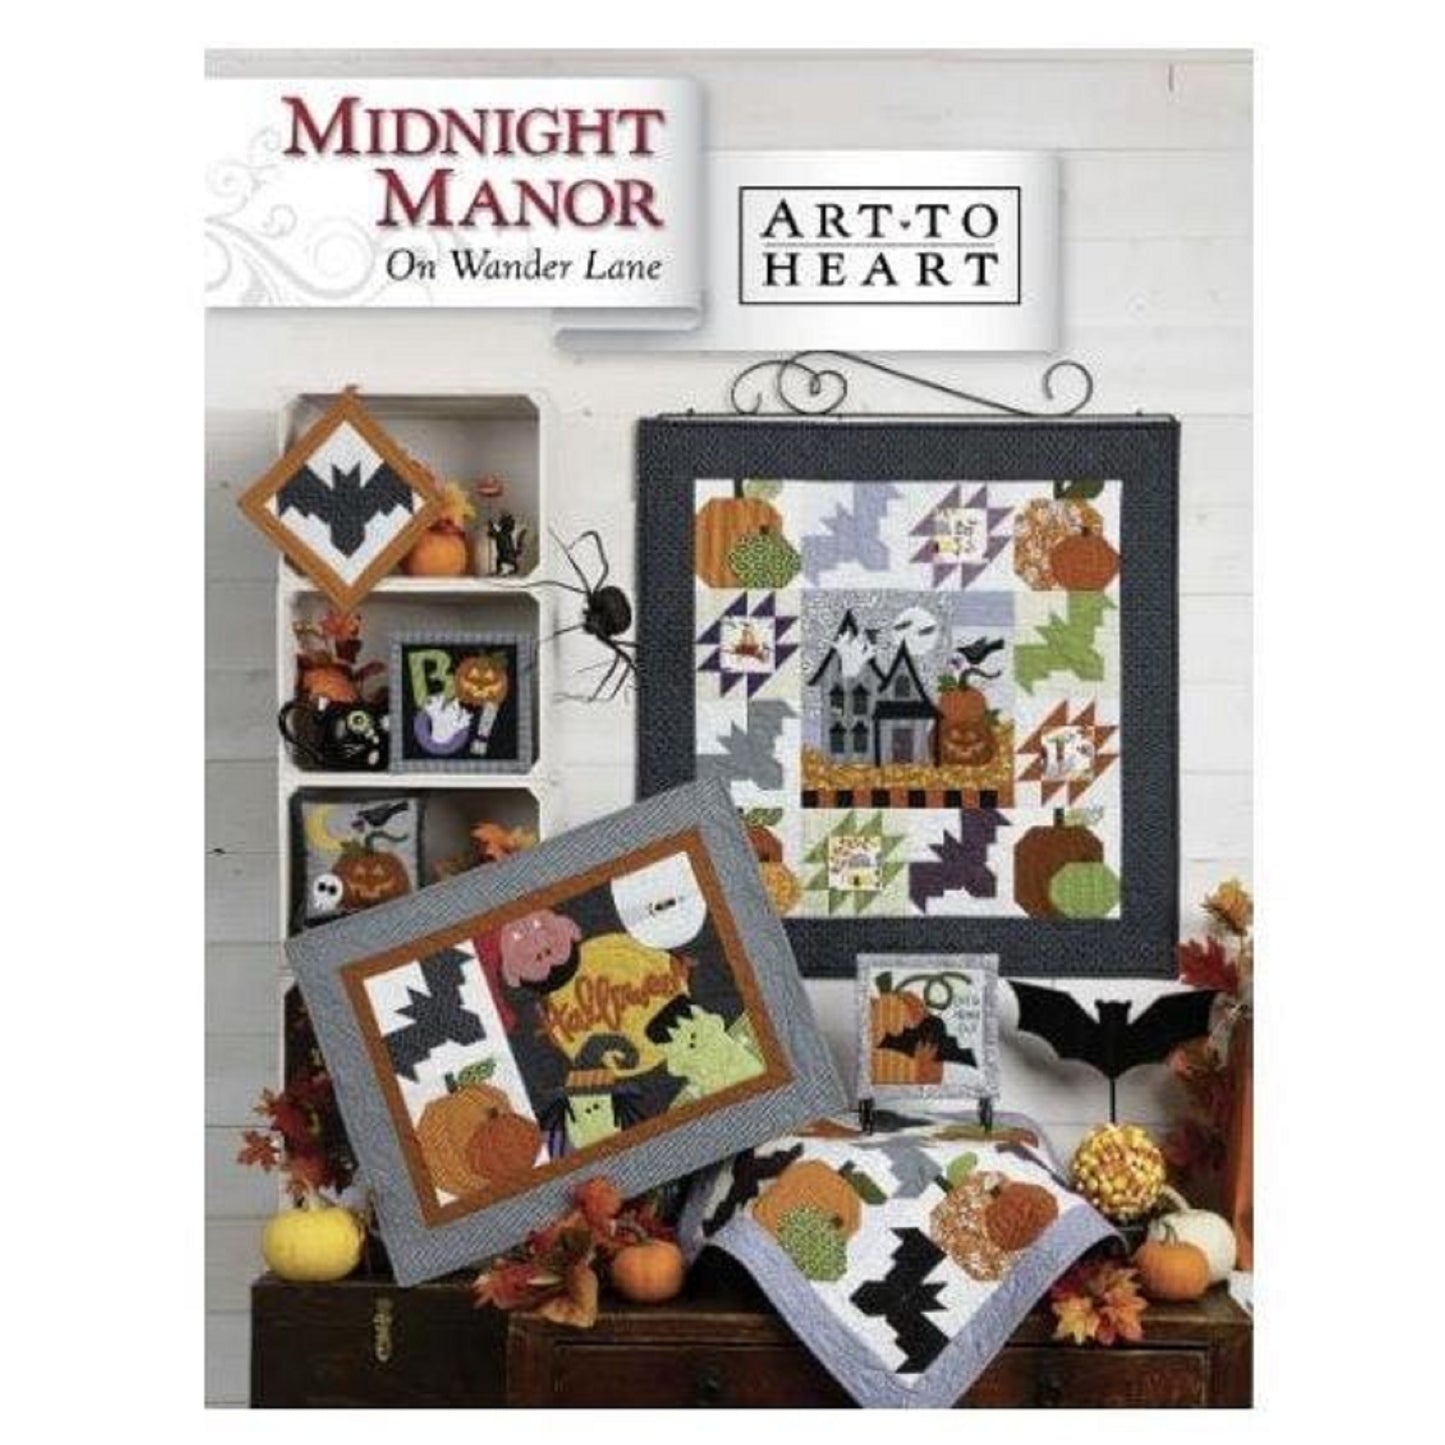 Midnight Manor On Wander Lane-Art To Heart-Quilting Book